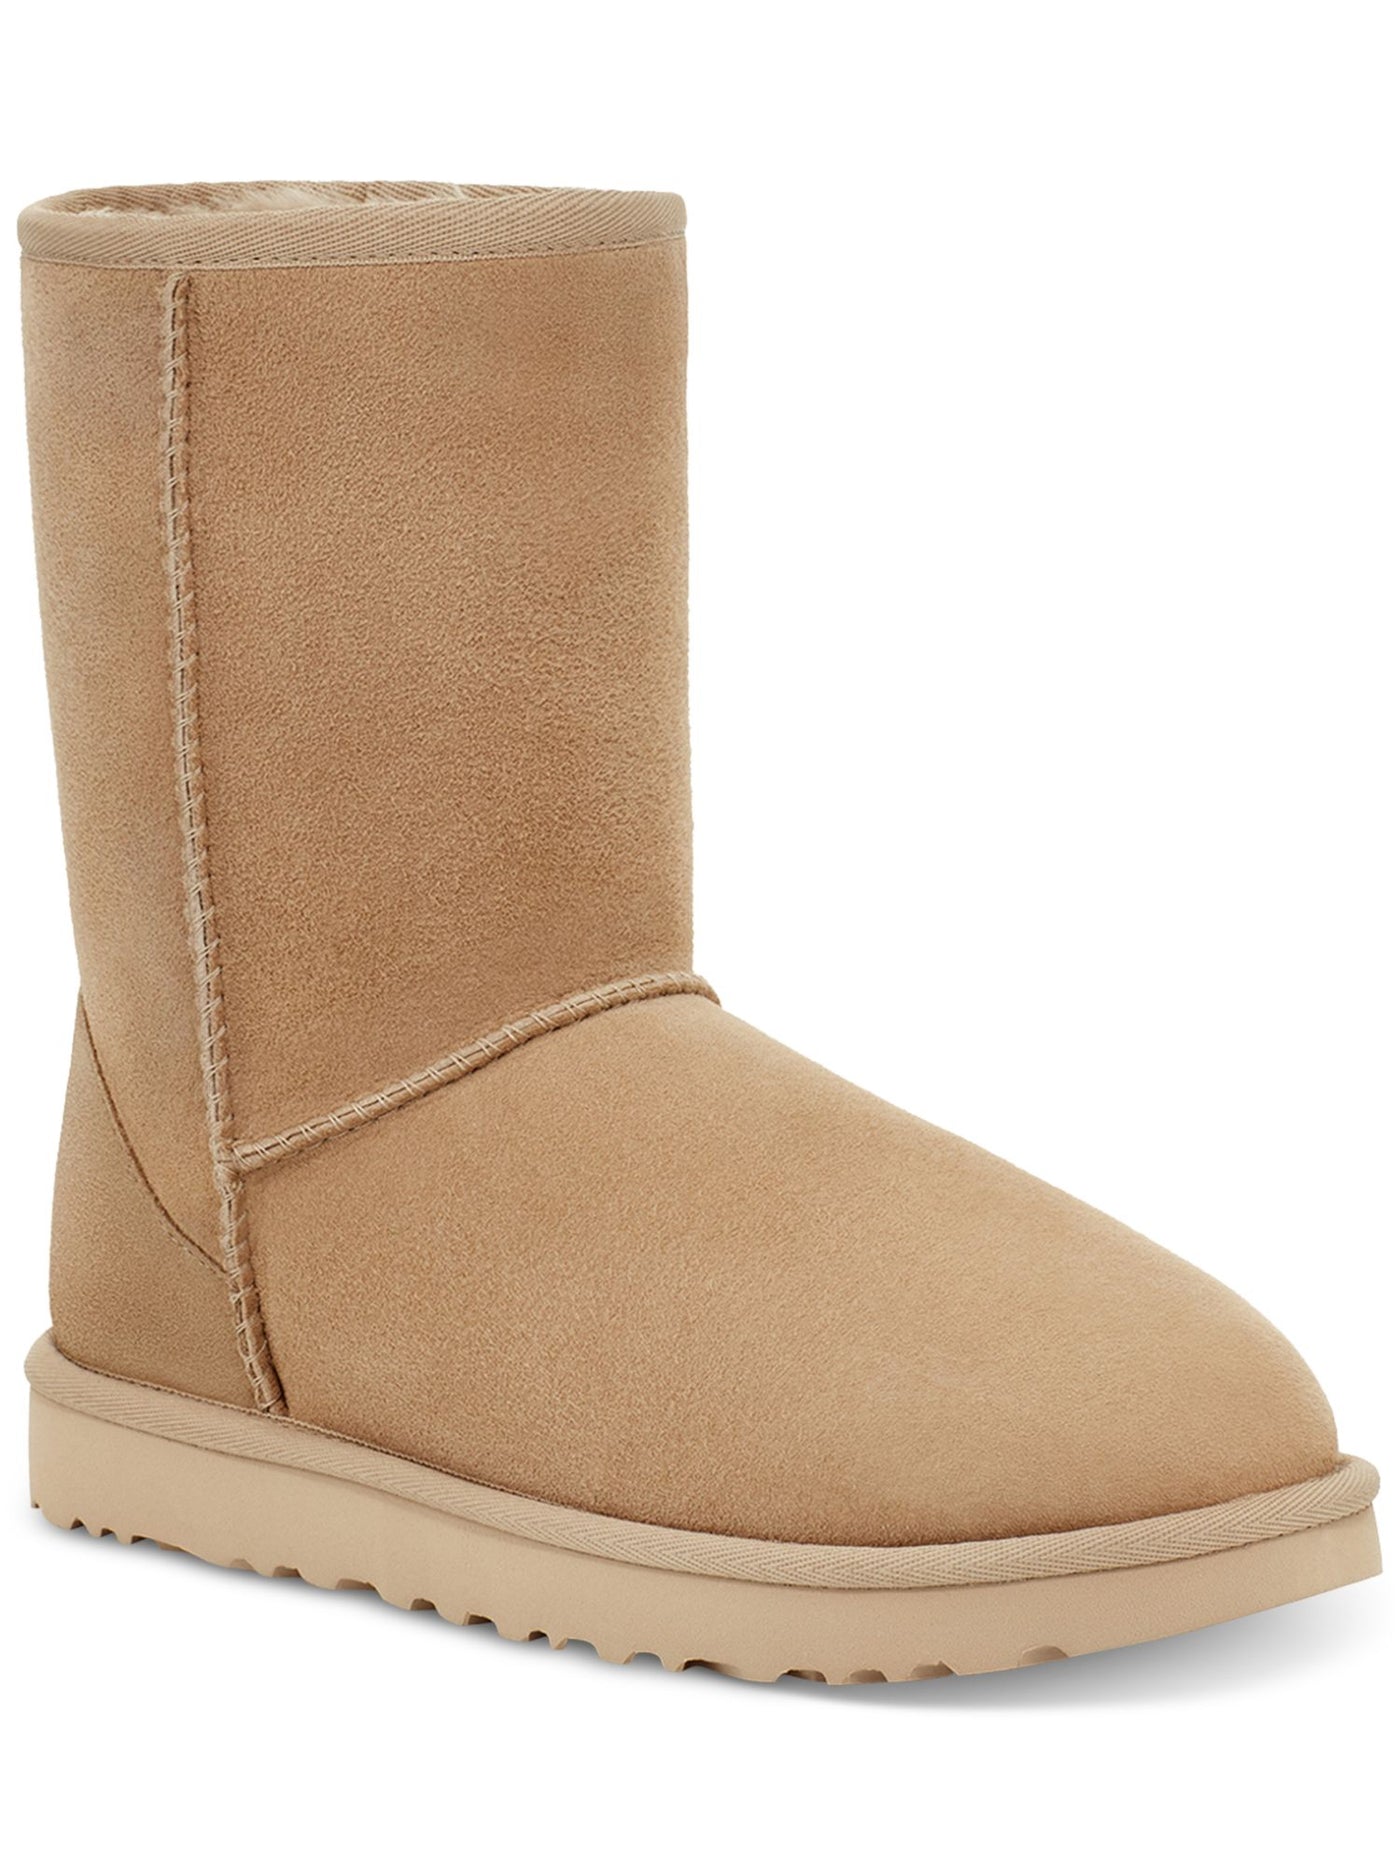 UGG Womens Beige Cushioned Classic Short Ii Round Toe Leather Winter Boots 10